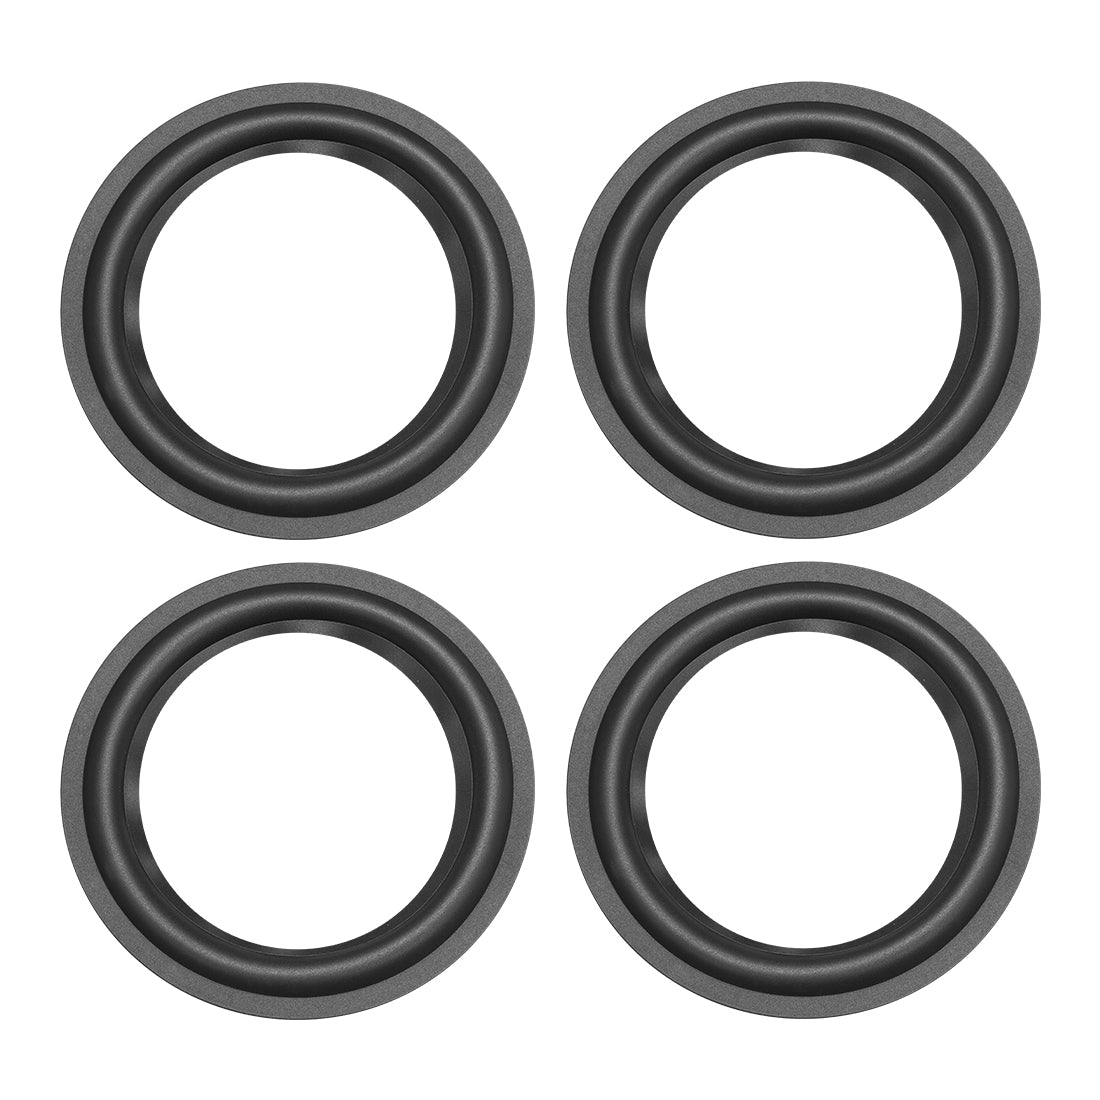 uxcell Uxcell 5.5" 5.5 Inch Speaker Rubber Edge Surround Rings Replacement Part for Speaker Repair or DIY 4pcs